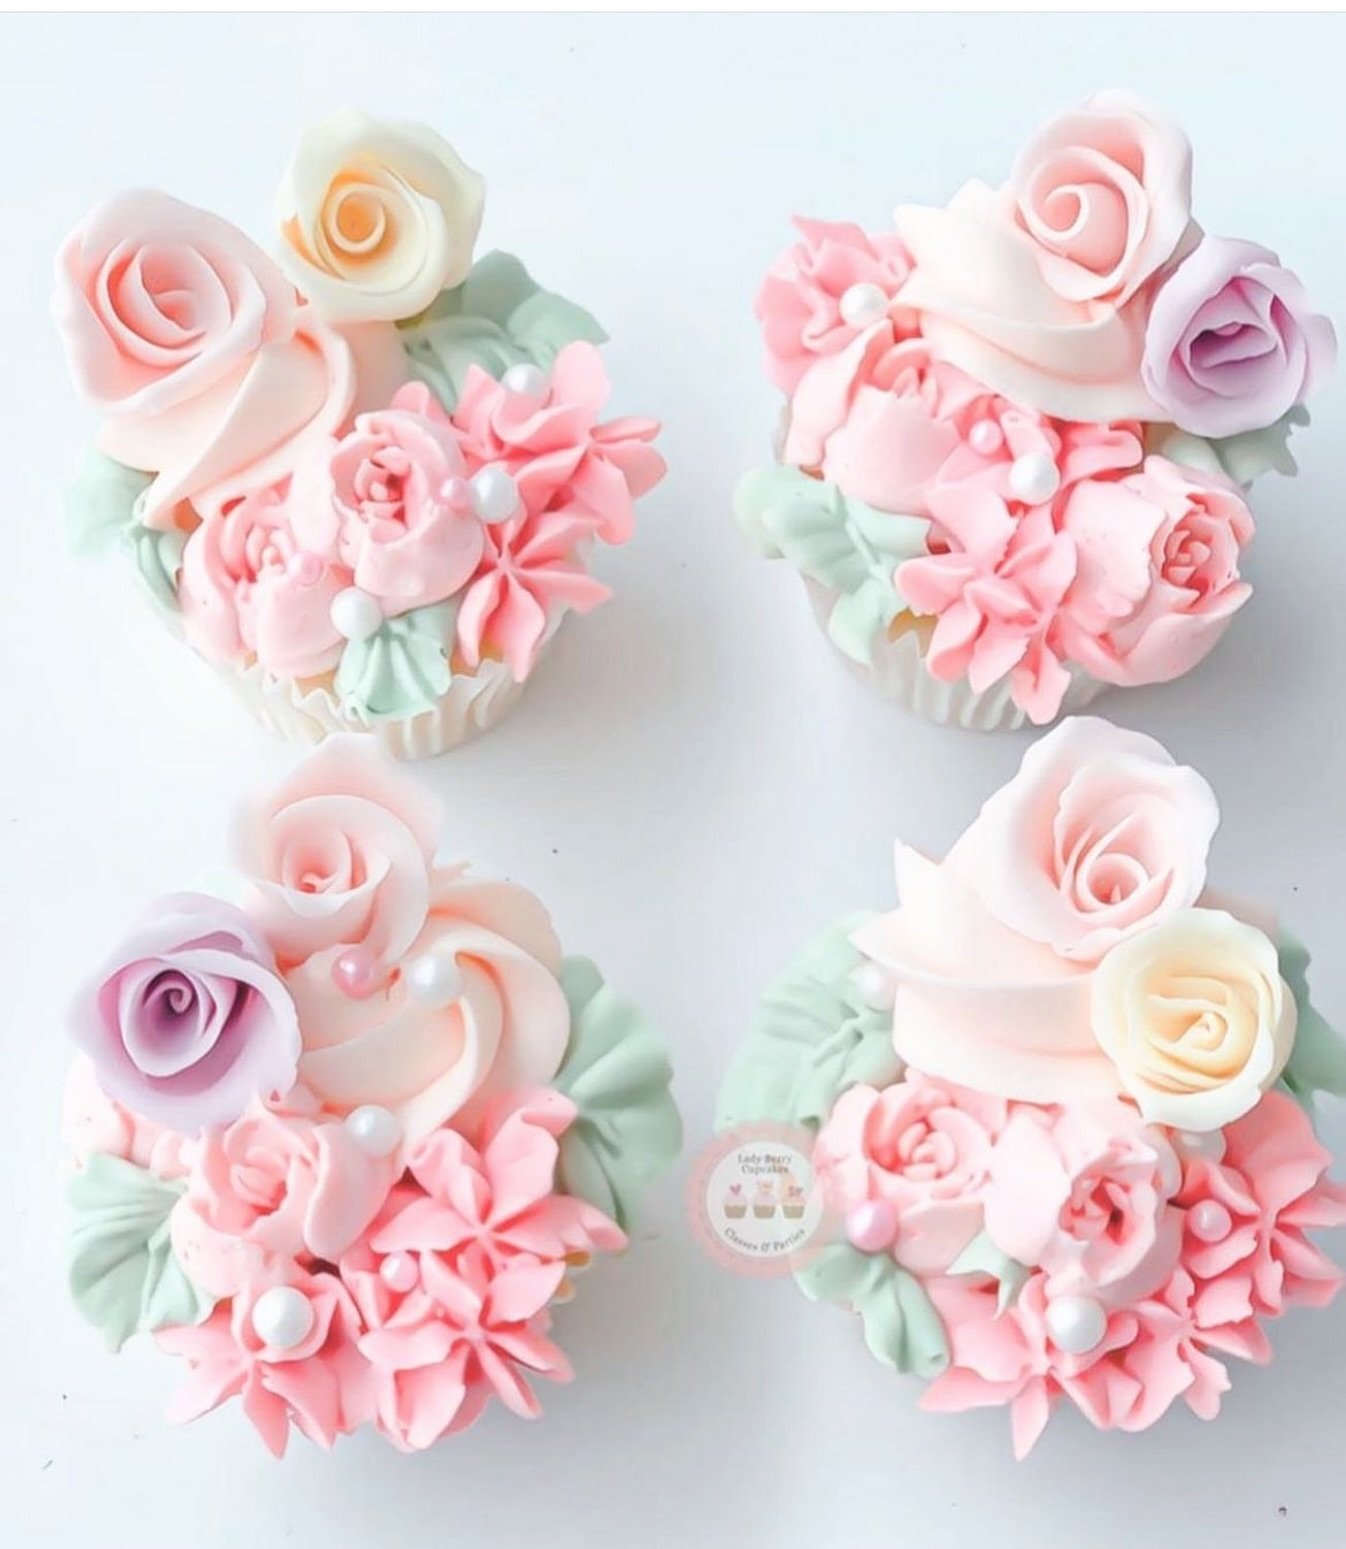 THIS is about as good as my buttercream gets! With strategically placed Sugar flowers to cover up the damage&hellip; 😂🌸

🧁Are you better at piping or fondant work? 

#Cupcakes #CupcakeDecorating #CupcakeDecoratingClasses #LadyBerryCupcakes #Butter